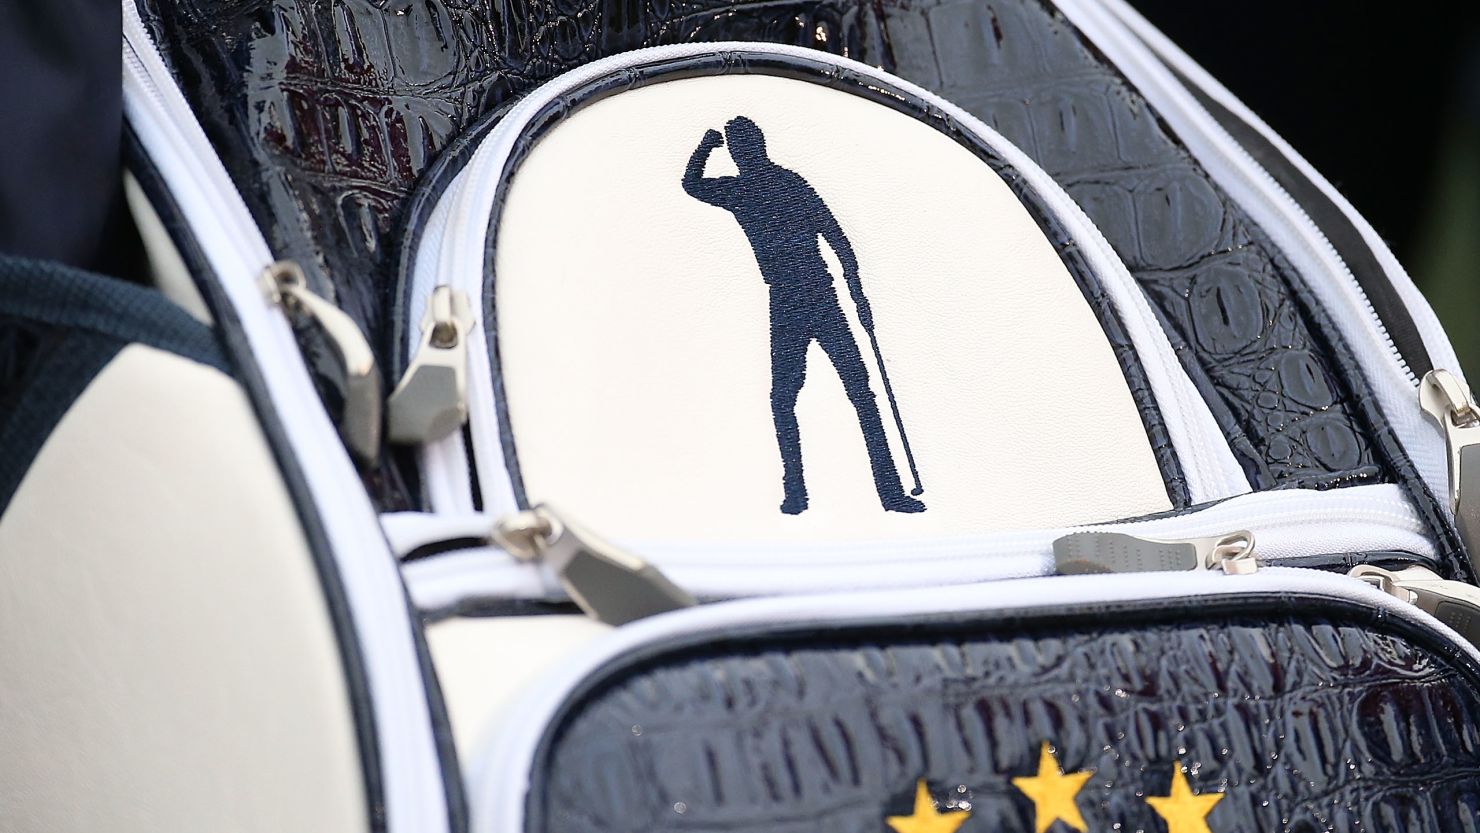 The special logo of Seve Ballesteros has been emblazoned on the golf bags of the European Ryder Cup team at Medinah  